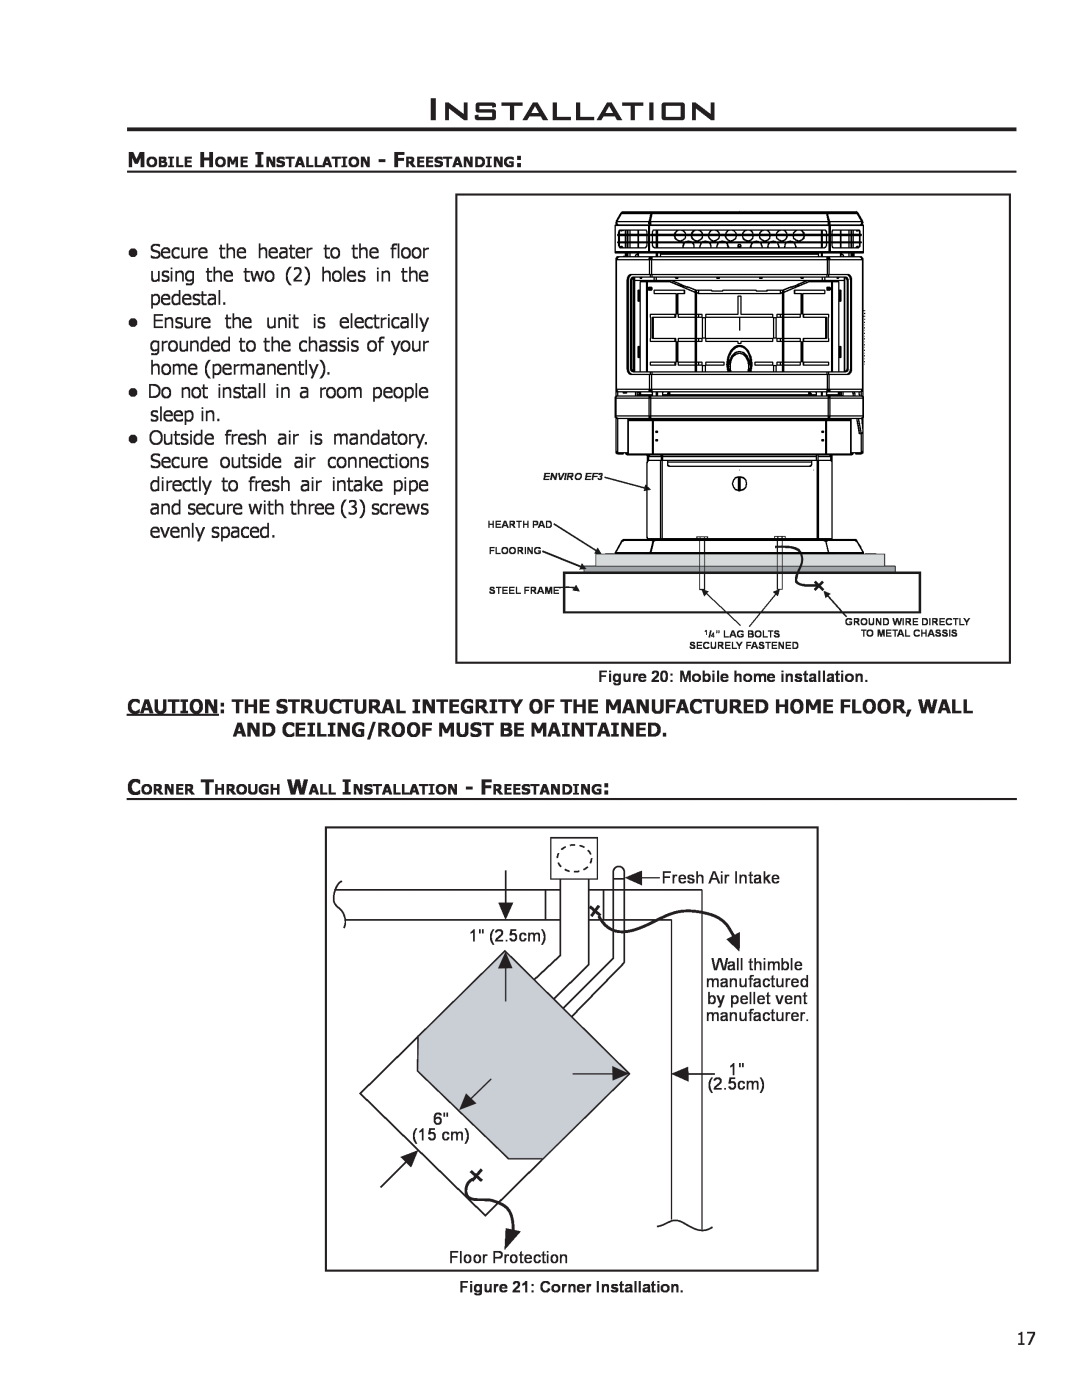 Enviro EF3 owner manual Installation, Do not install in a room people sleep in 